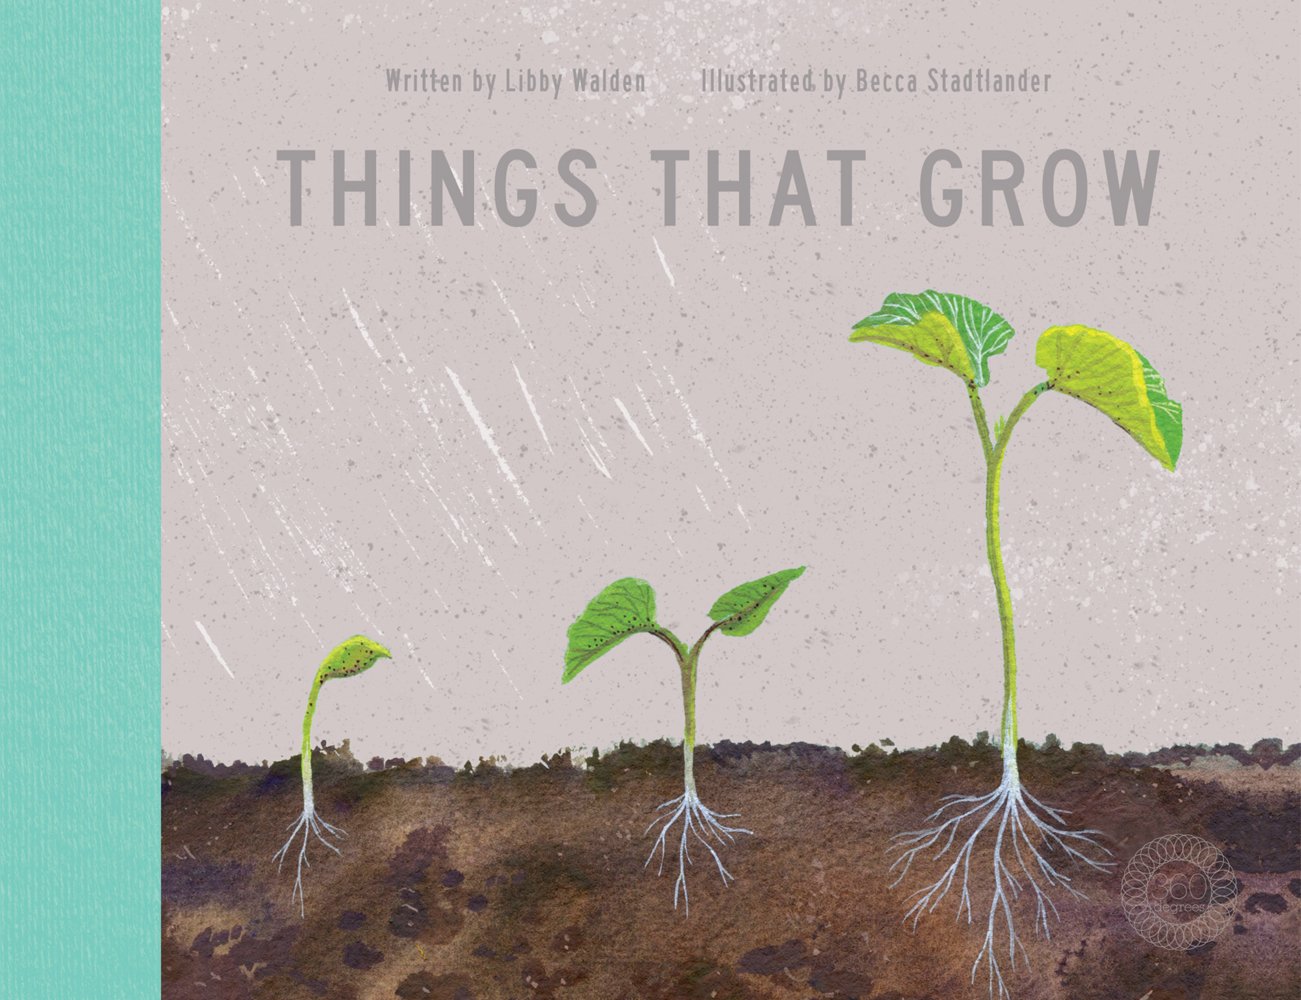 Things That Grow - Becca Stadtlander and Libby Walden